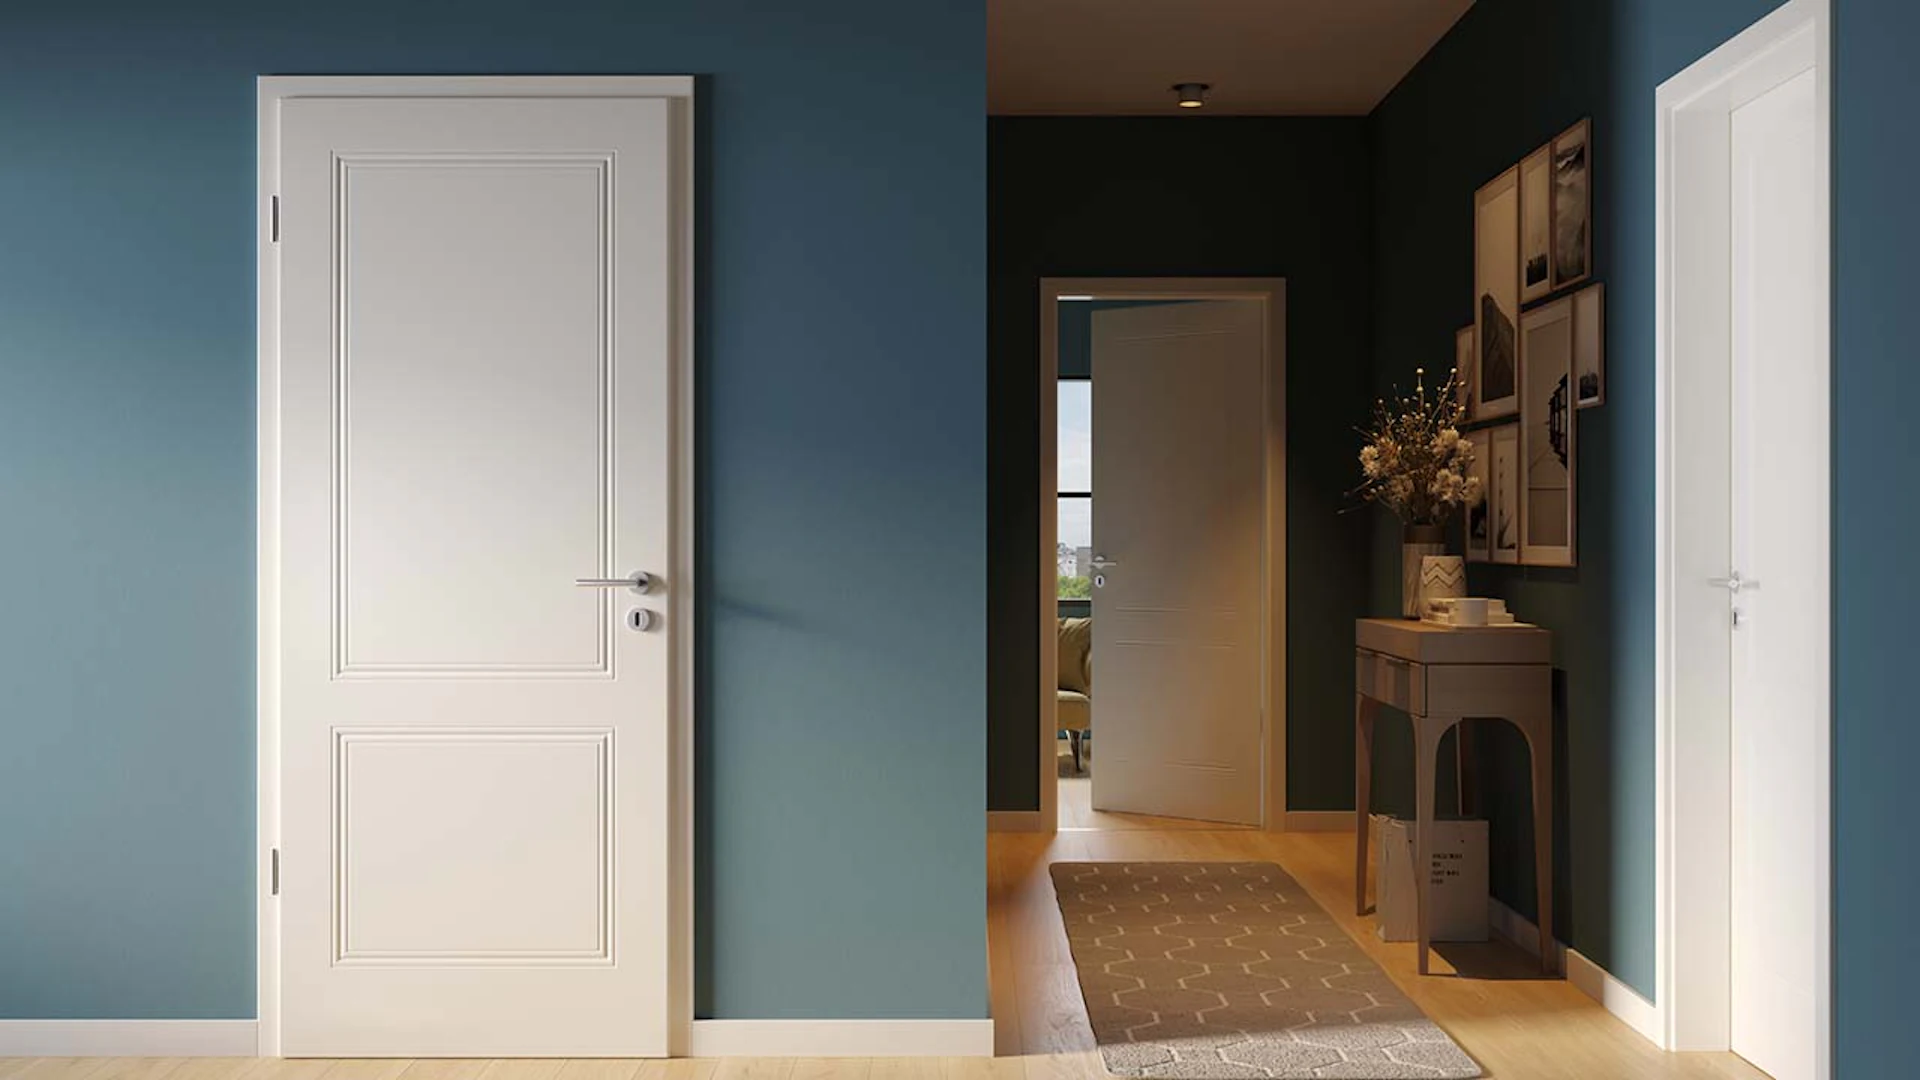 planeo interior door lacquer 2.0 - Aiko 9010 white lacquer 2110 x 985 mm DIN R - round RSP hinge 3-t